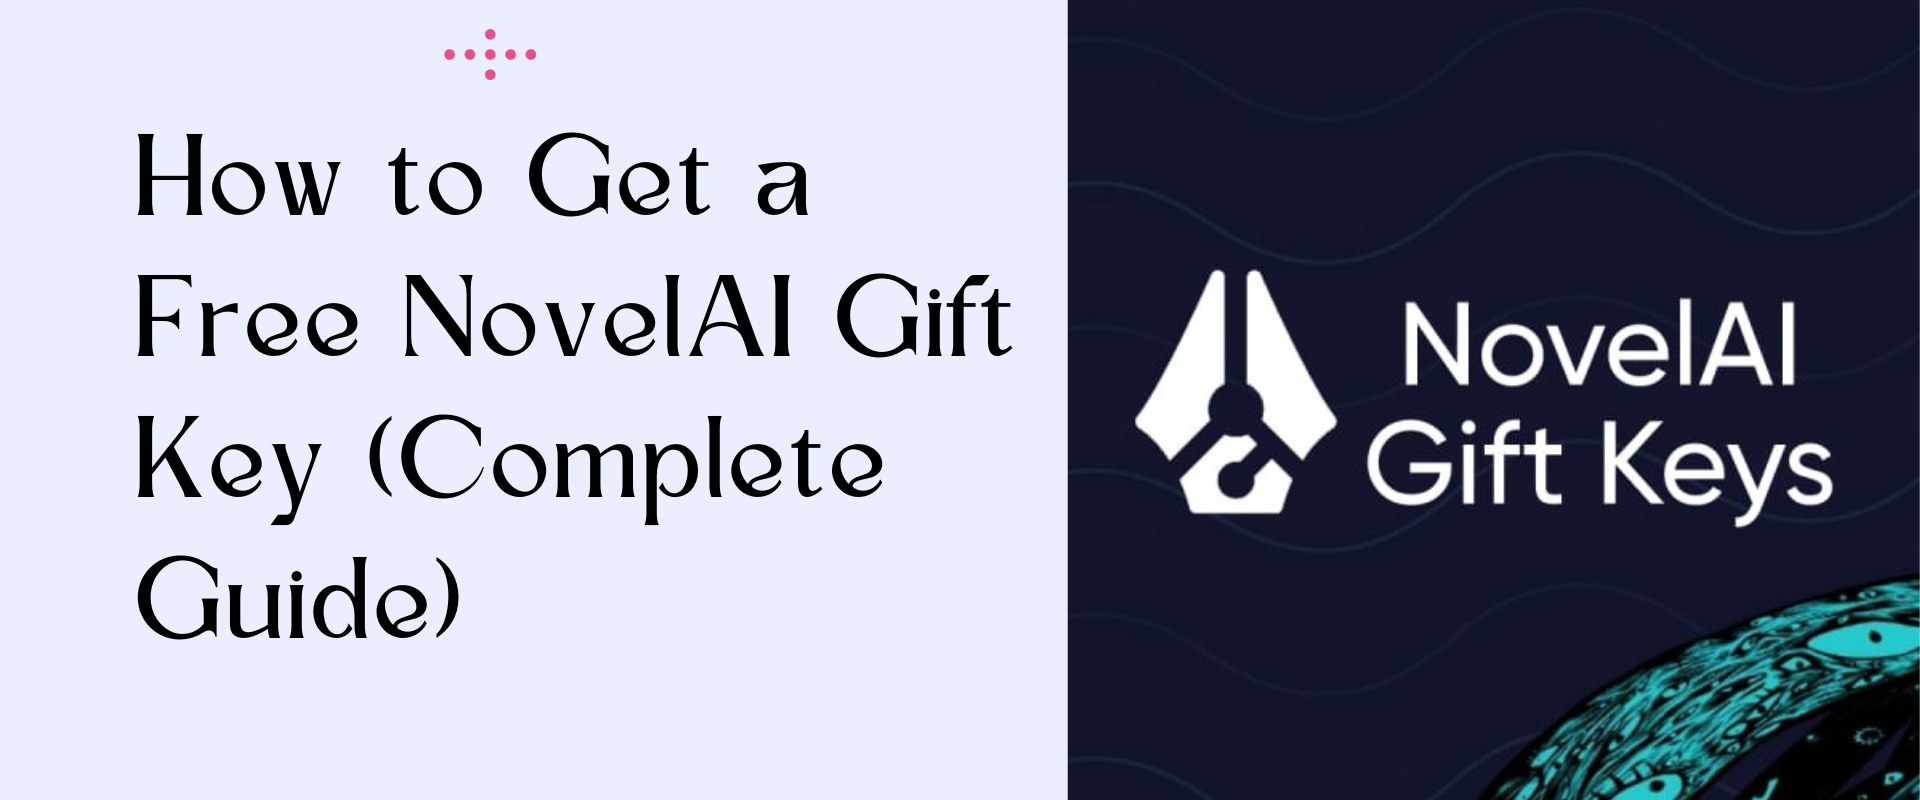 How to Get a Free NovelAI Gift Key (Complete Guide)